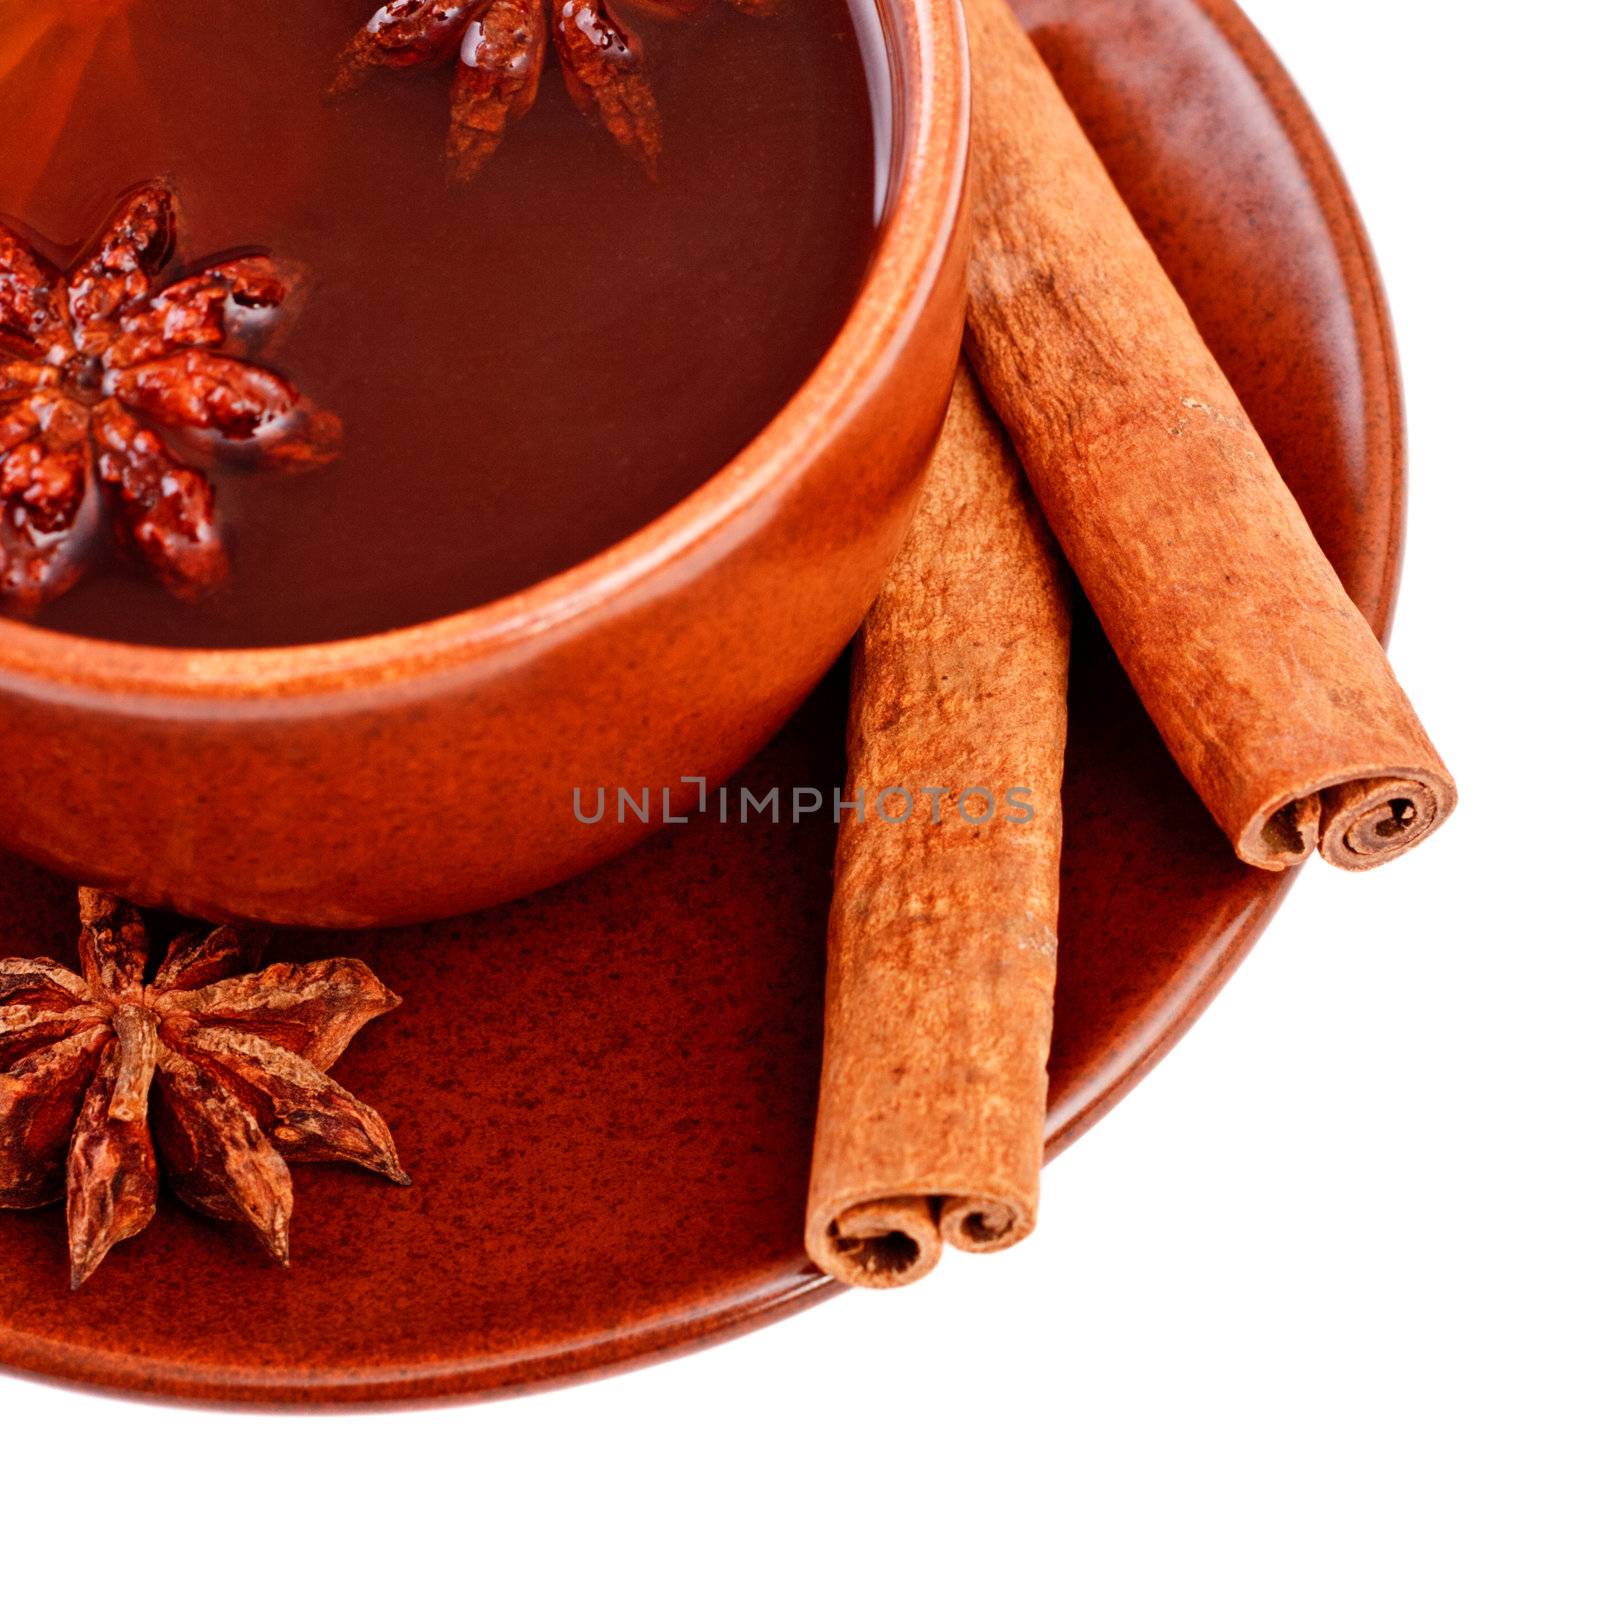 tea with cinnamon sticks and star anise by petr_malyshev